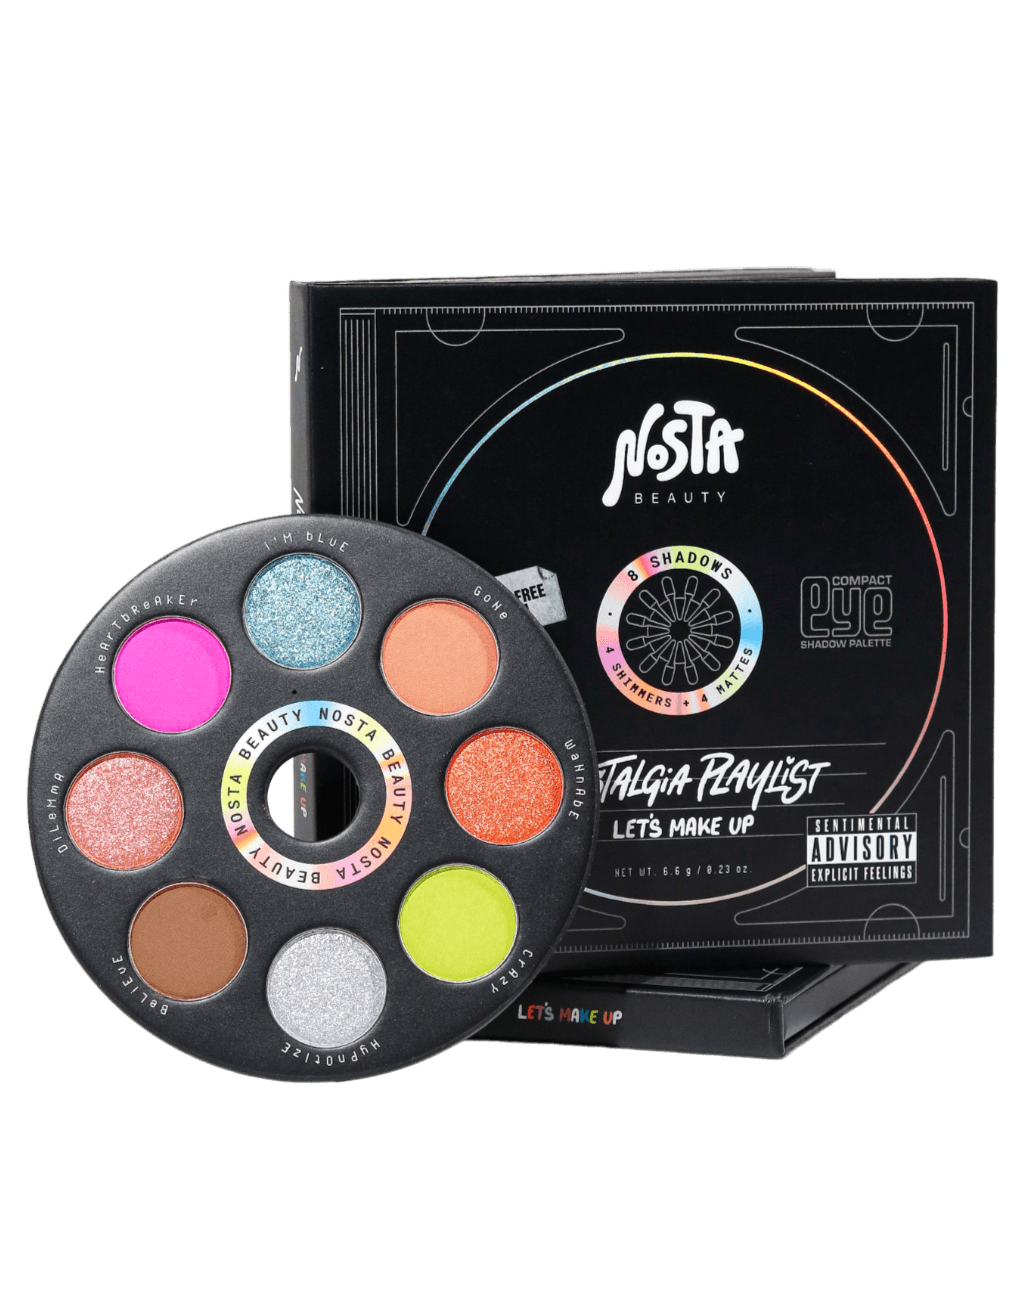 Nosta Beauty's talc free and organic cd eyeshadow palette. This 8-shade palette has 4 shimmer and 4 mattes with album-like packaging.